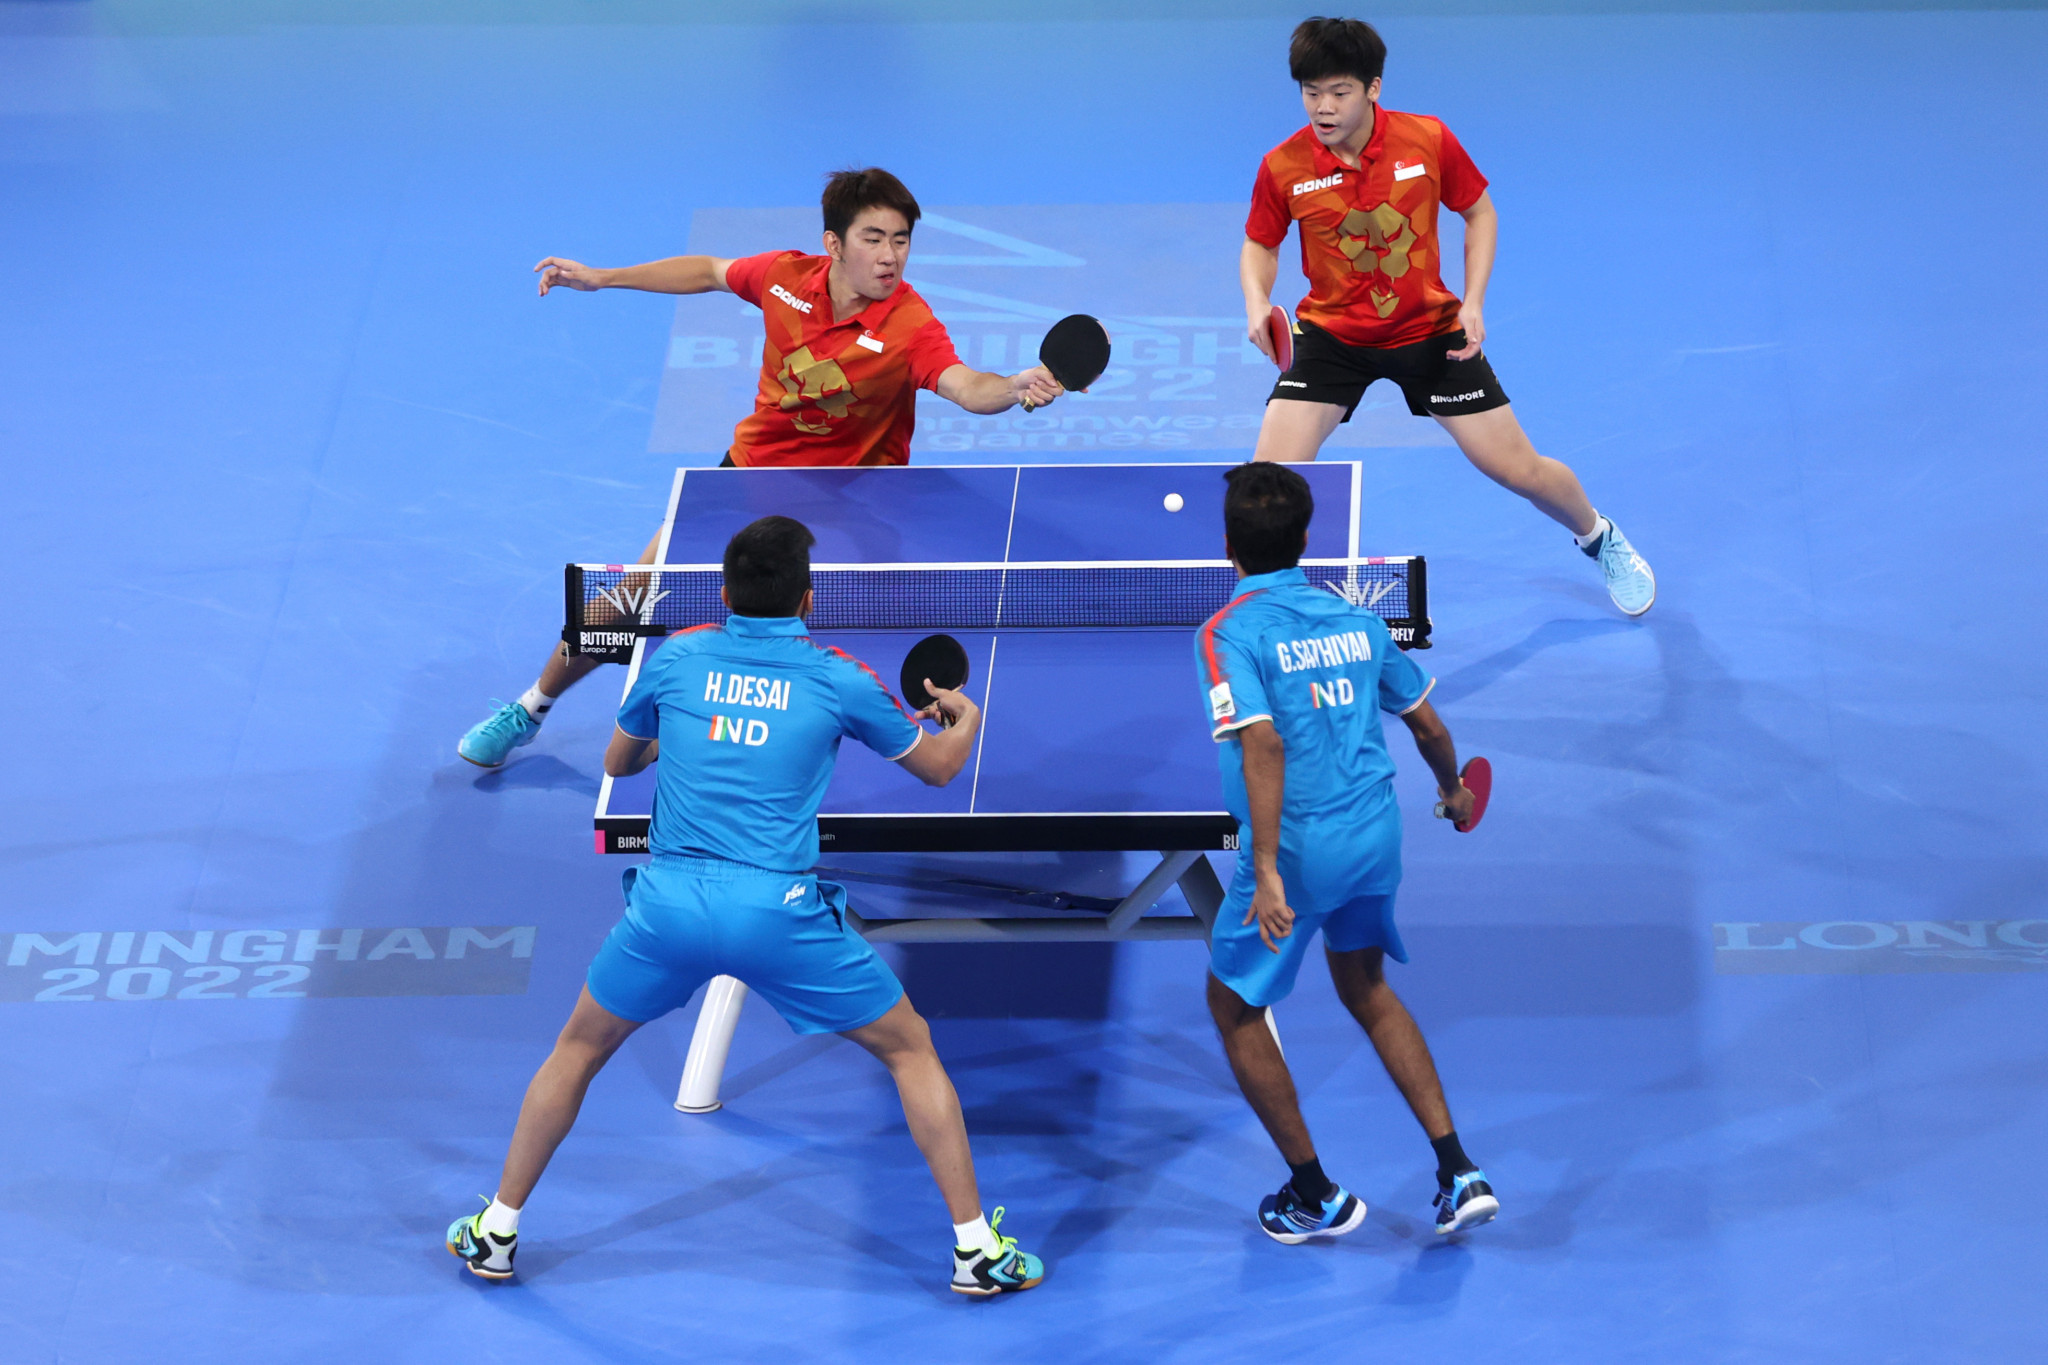 Harmeet Desai, front left, and Sathiyan Gnanasekaran, front right, won doubles and singles matches for India in the men's team table tennis final ©Getty Images